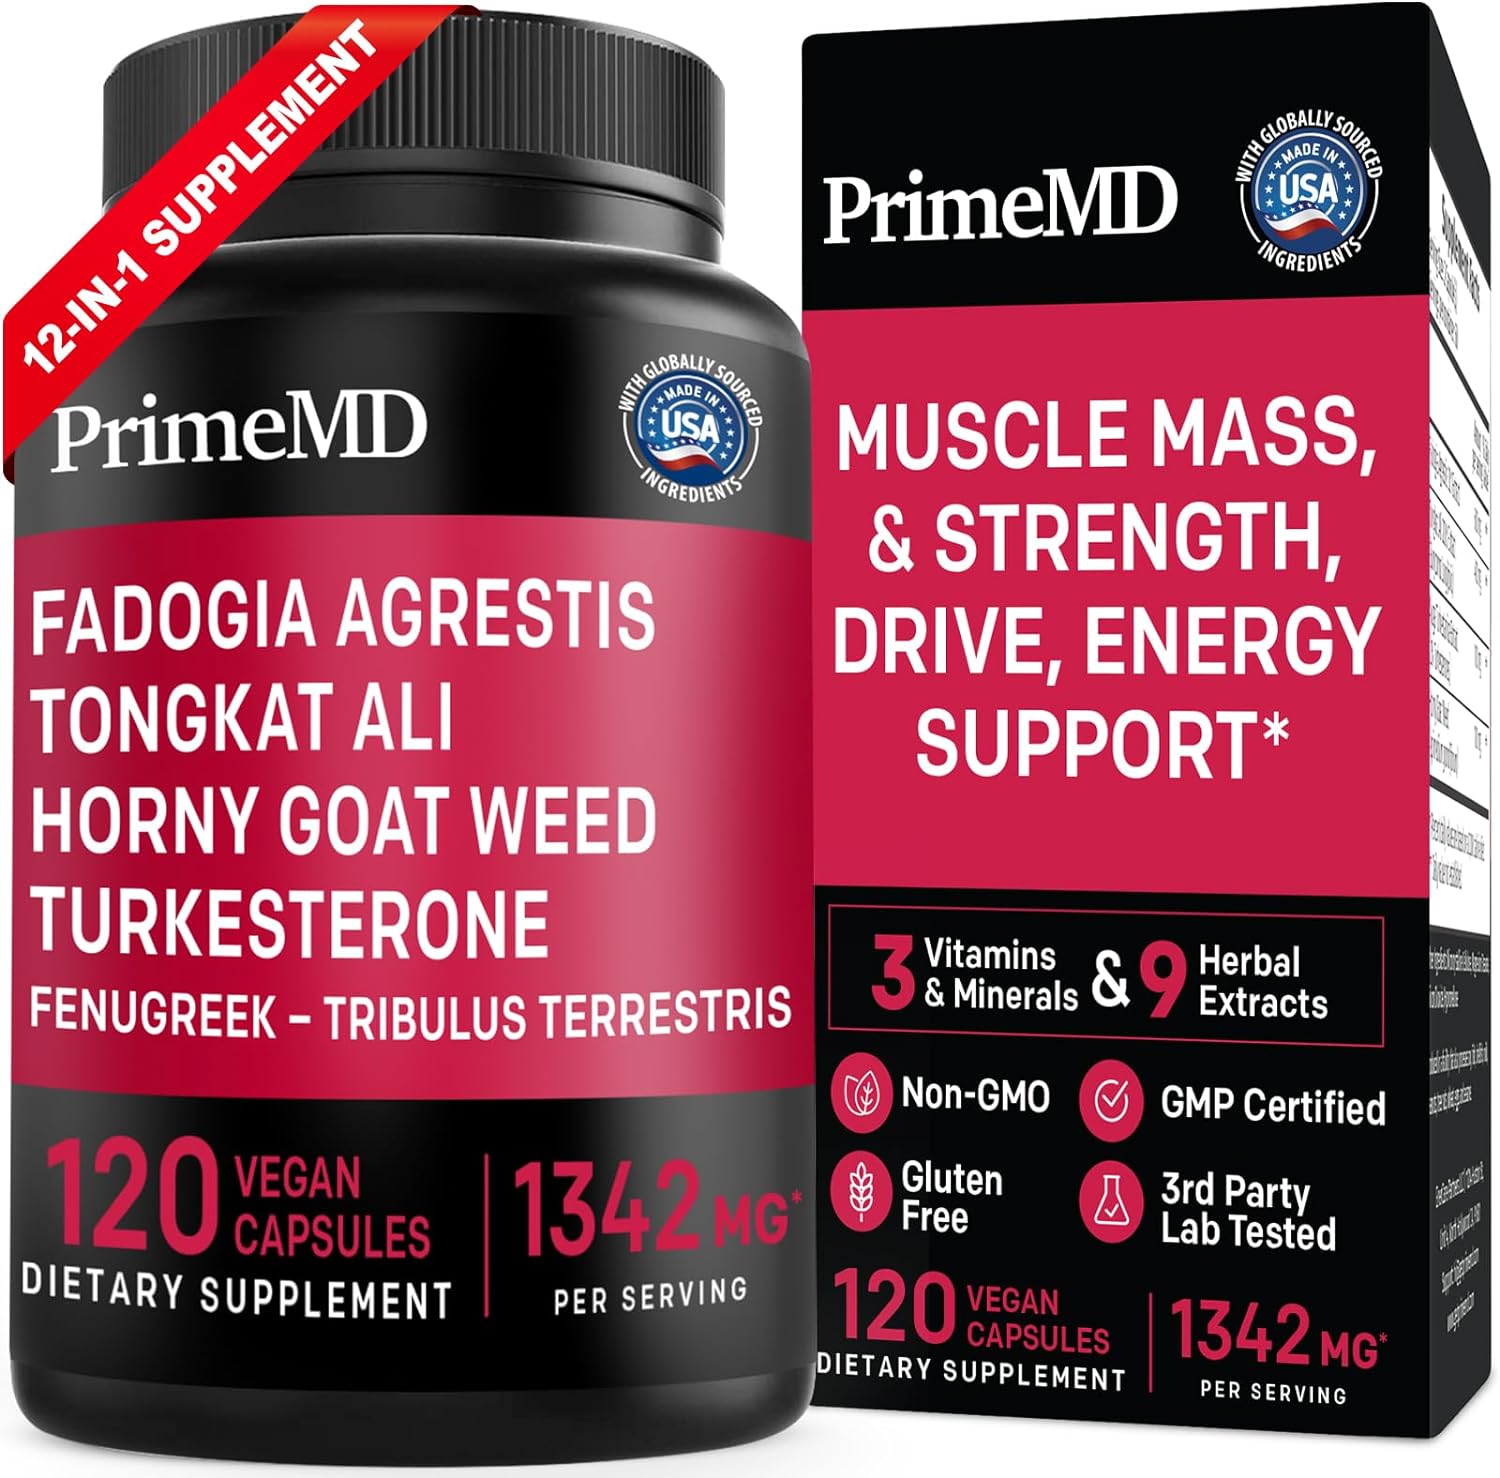 12-in-1 Testosterone Supplement for Men - Fadogia Agrestis and Tongkat Ali for Men with Horny Goat Weed - Men's Health Supplement For Overall Male Well-being with 1342mg Per Serving (120 capsules)